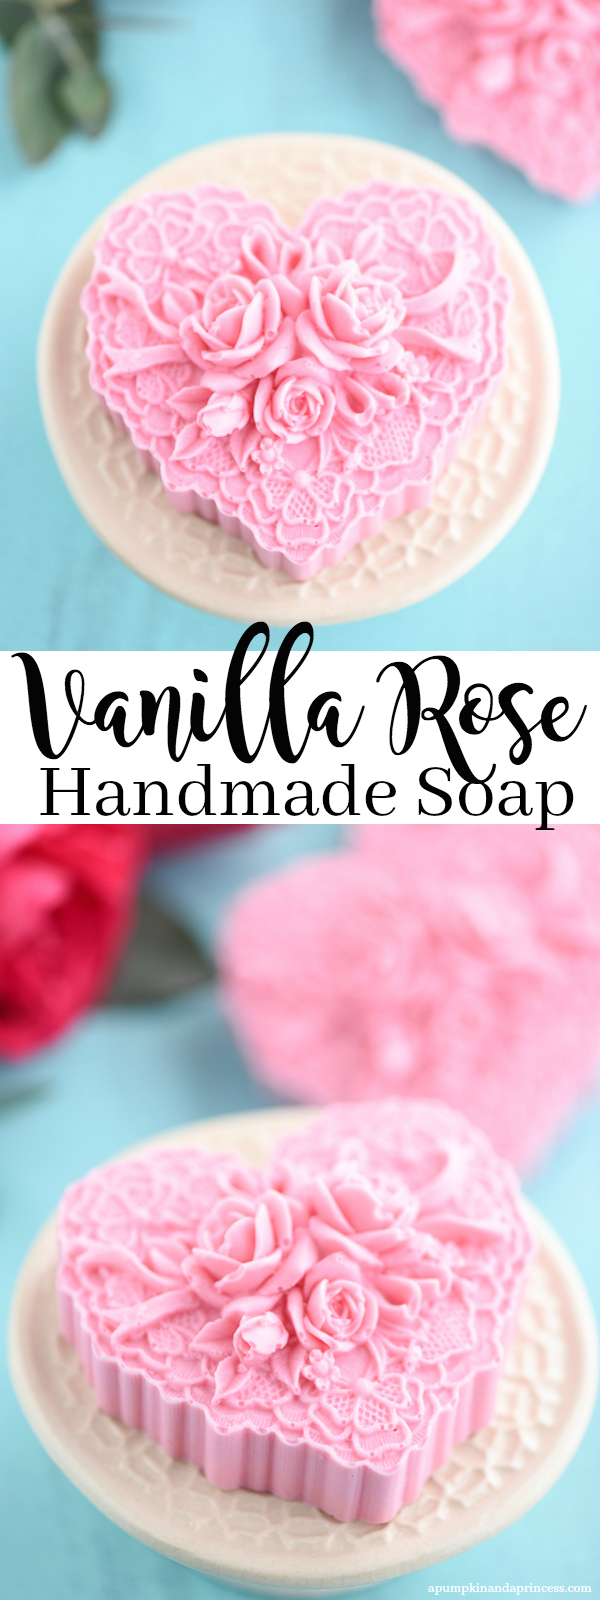 Handmade Vanilla Rose Soap – create a beautiful handmade gift or party favor with this easy DIY Vanilla Rose Soap tutorial.